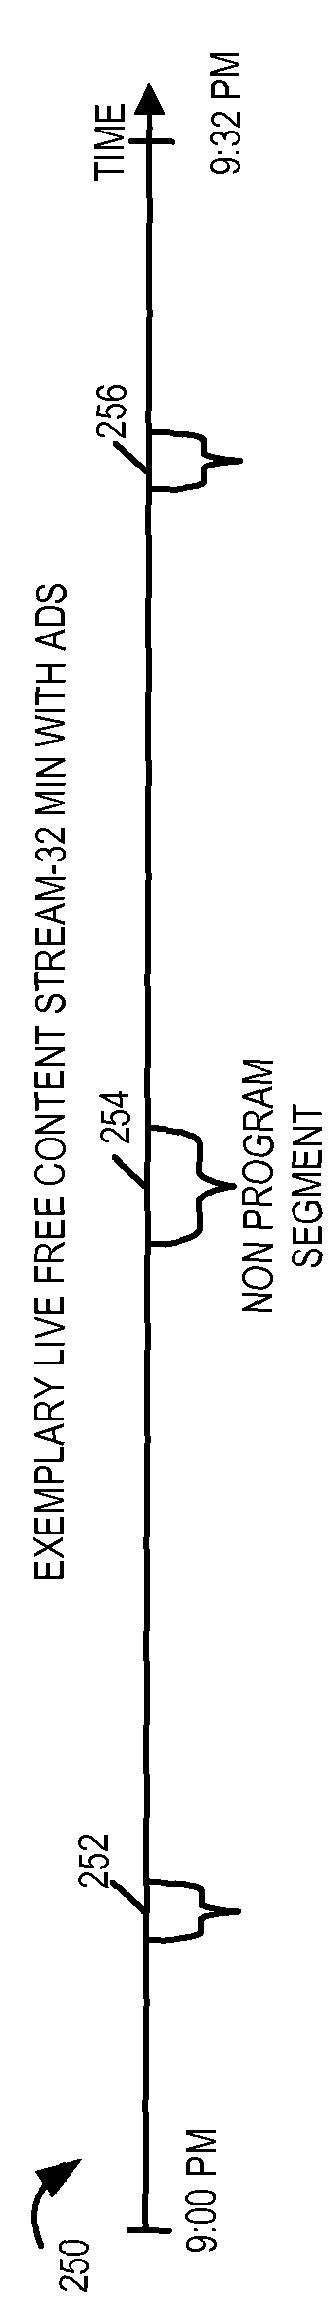 Methods and apparatus for determining a normalized time for use in resuming content playback